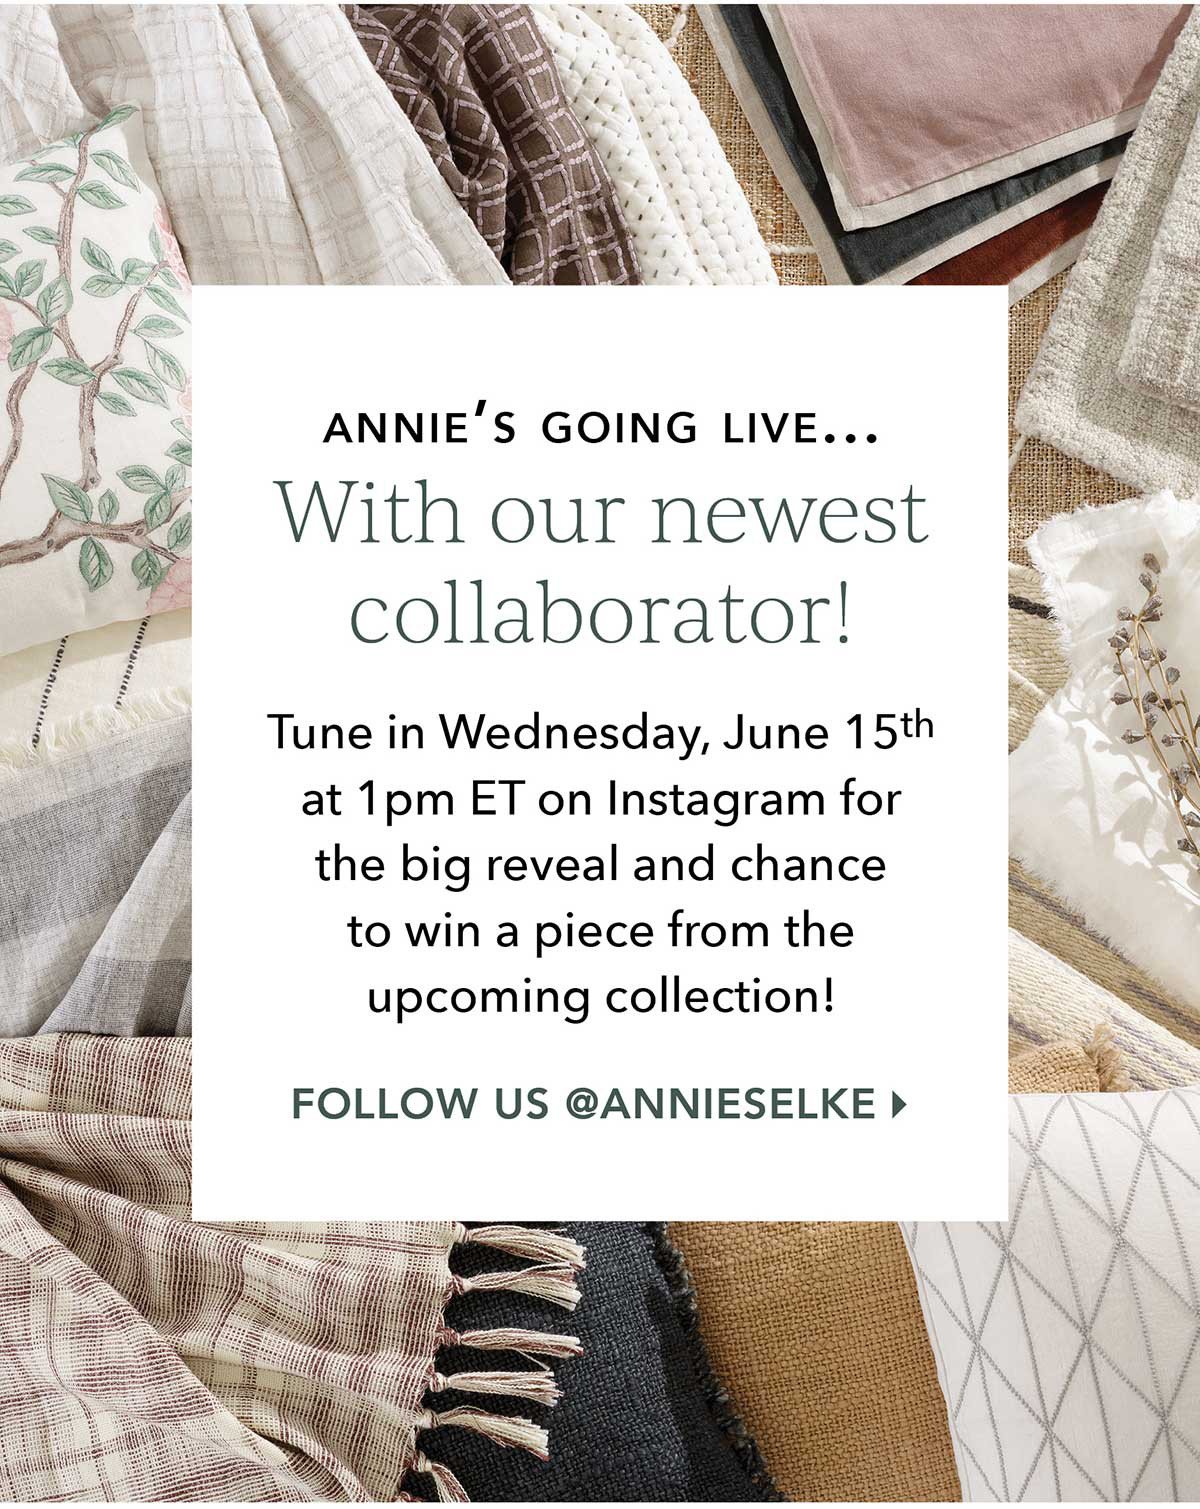 Annie's going live with out newest collaborator!